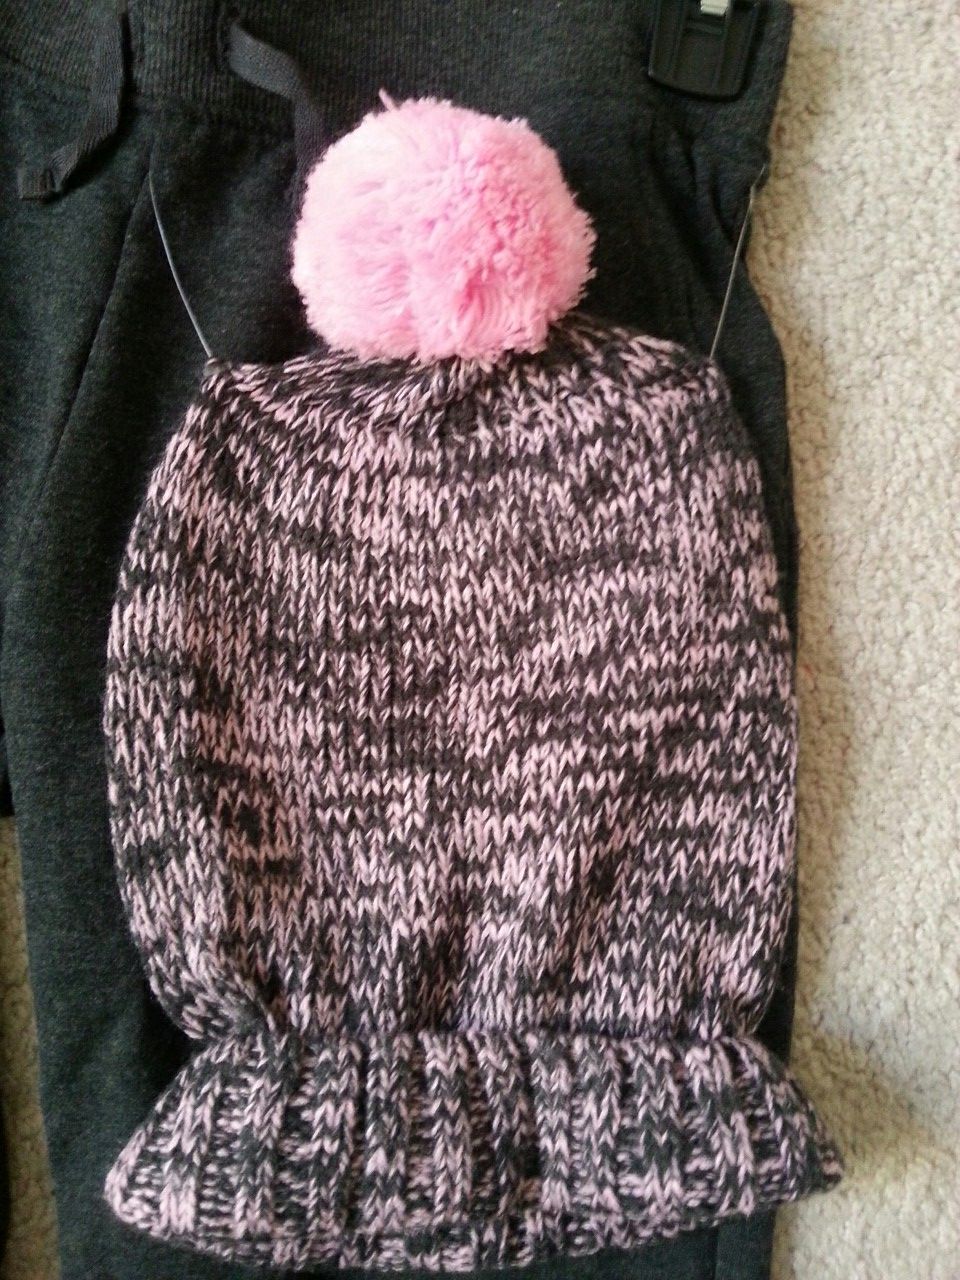 Black and pink winter hat